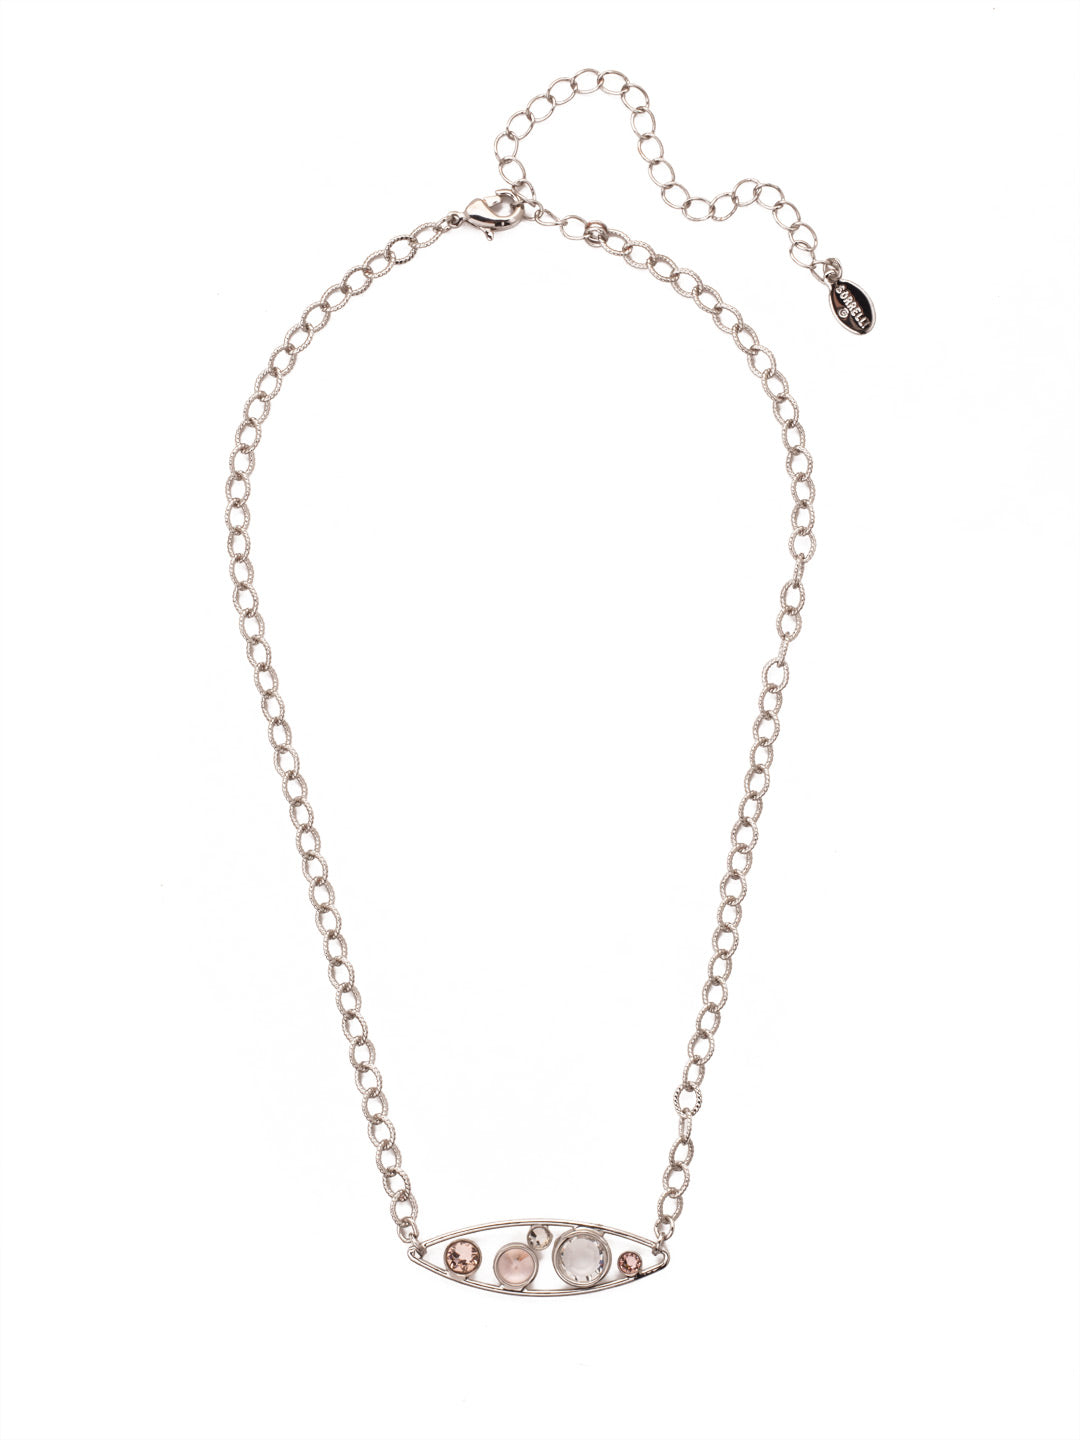 Charlene Single Tennis Necklace - NFC50PDSNB - <p>The Charlene Single Tennis Necklace features delicate crystal channels inside a single metal oblong hoop, sitting at the front of an adjustable chain, secured with a lobster claw clasp. From Sorrelli's Snow Bunny collection in our Palladium finish.</p>